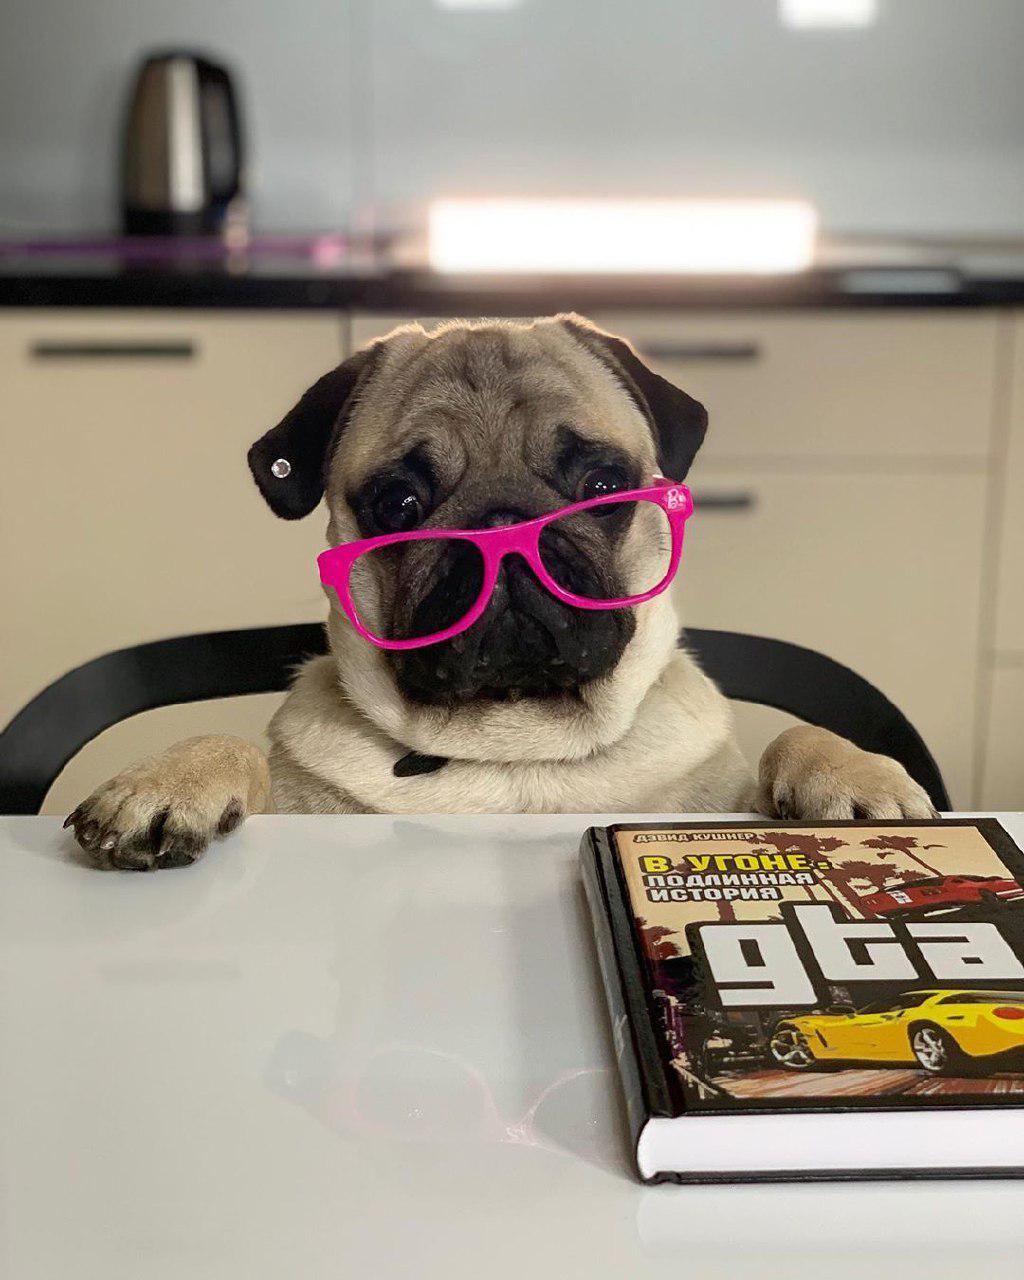 Pug wearing pink glasses while sitting on the chair in front of a book in the table